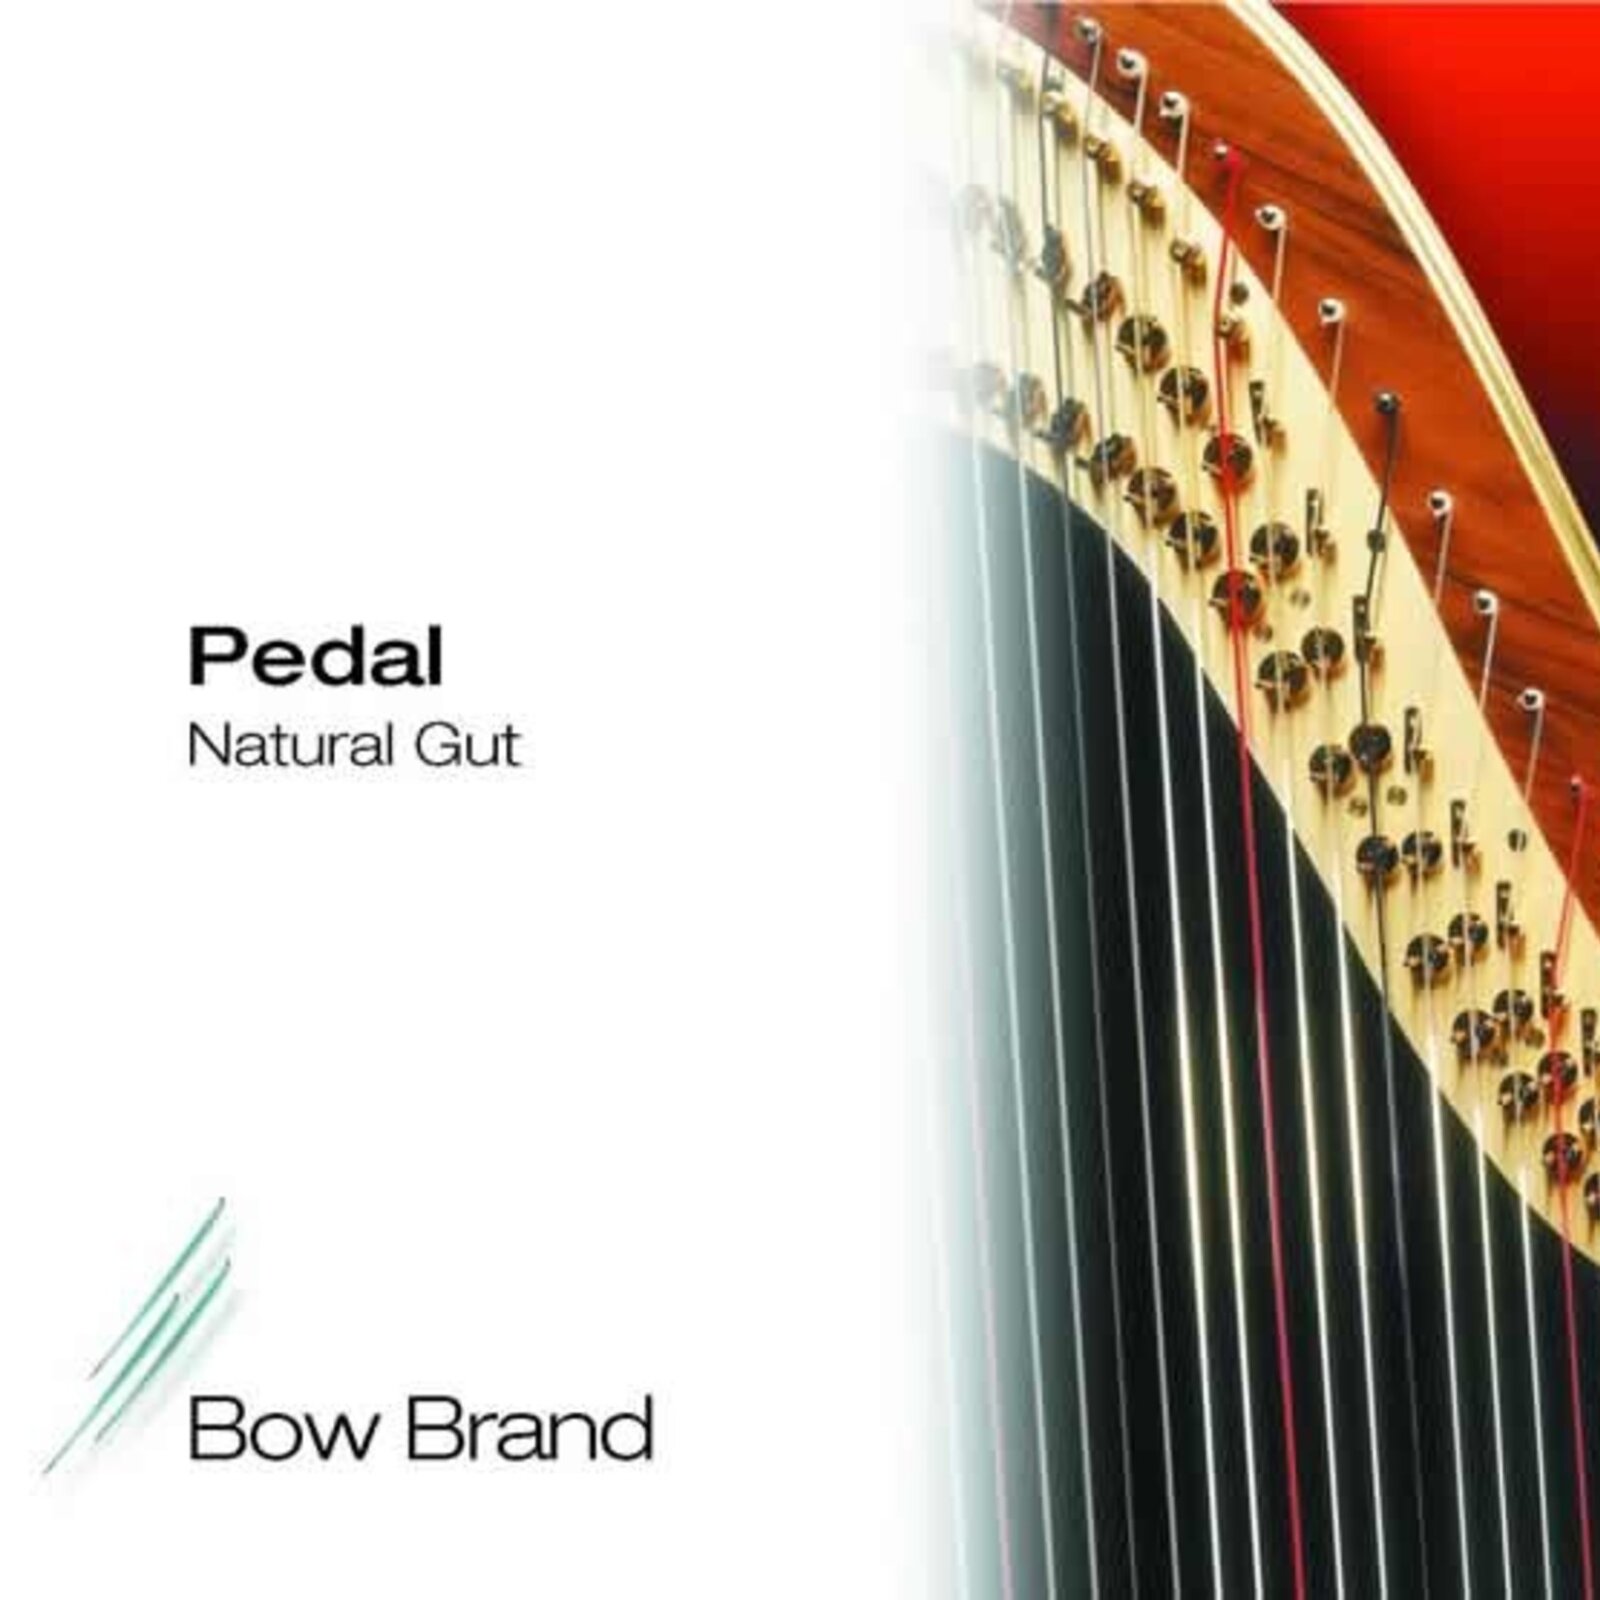 Bow Brand N 11 B 2nd octave in gut for pedal harp : photo 1